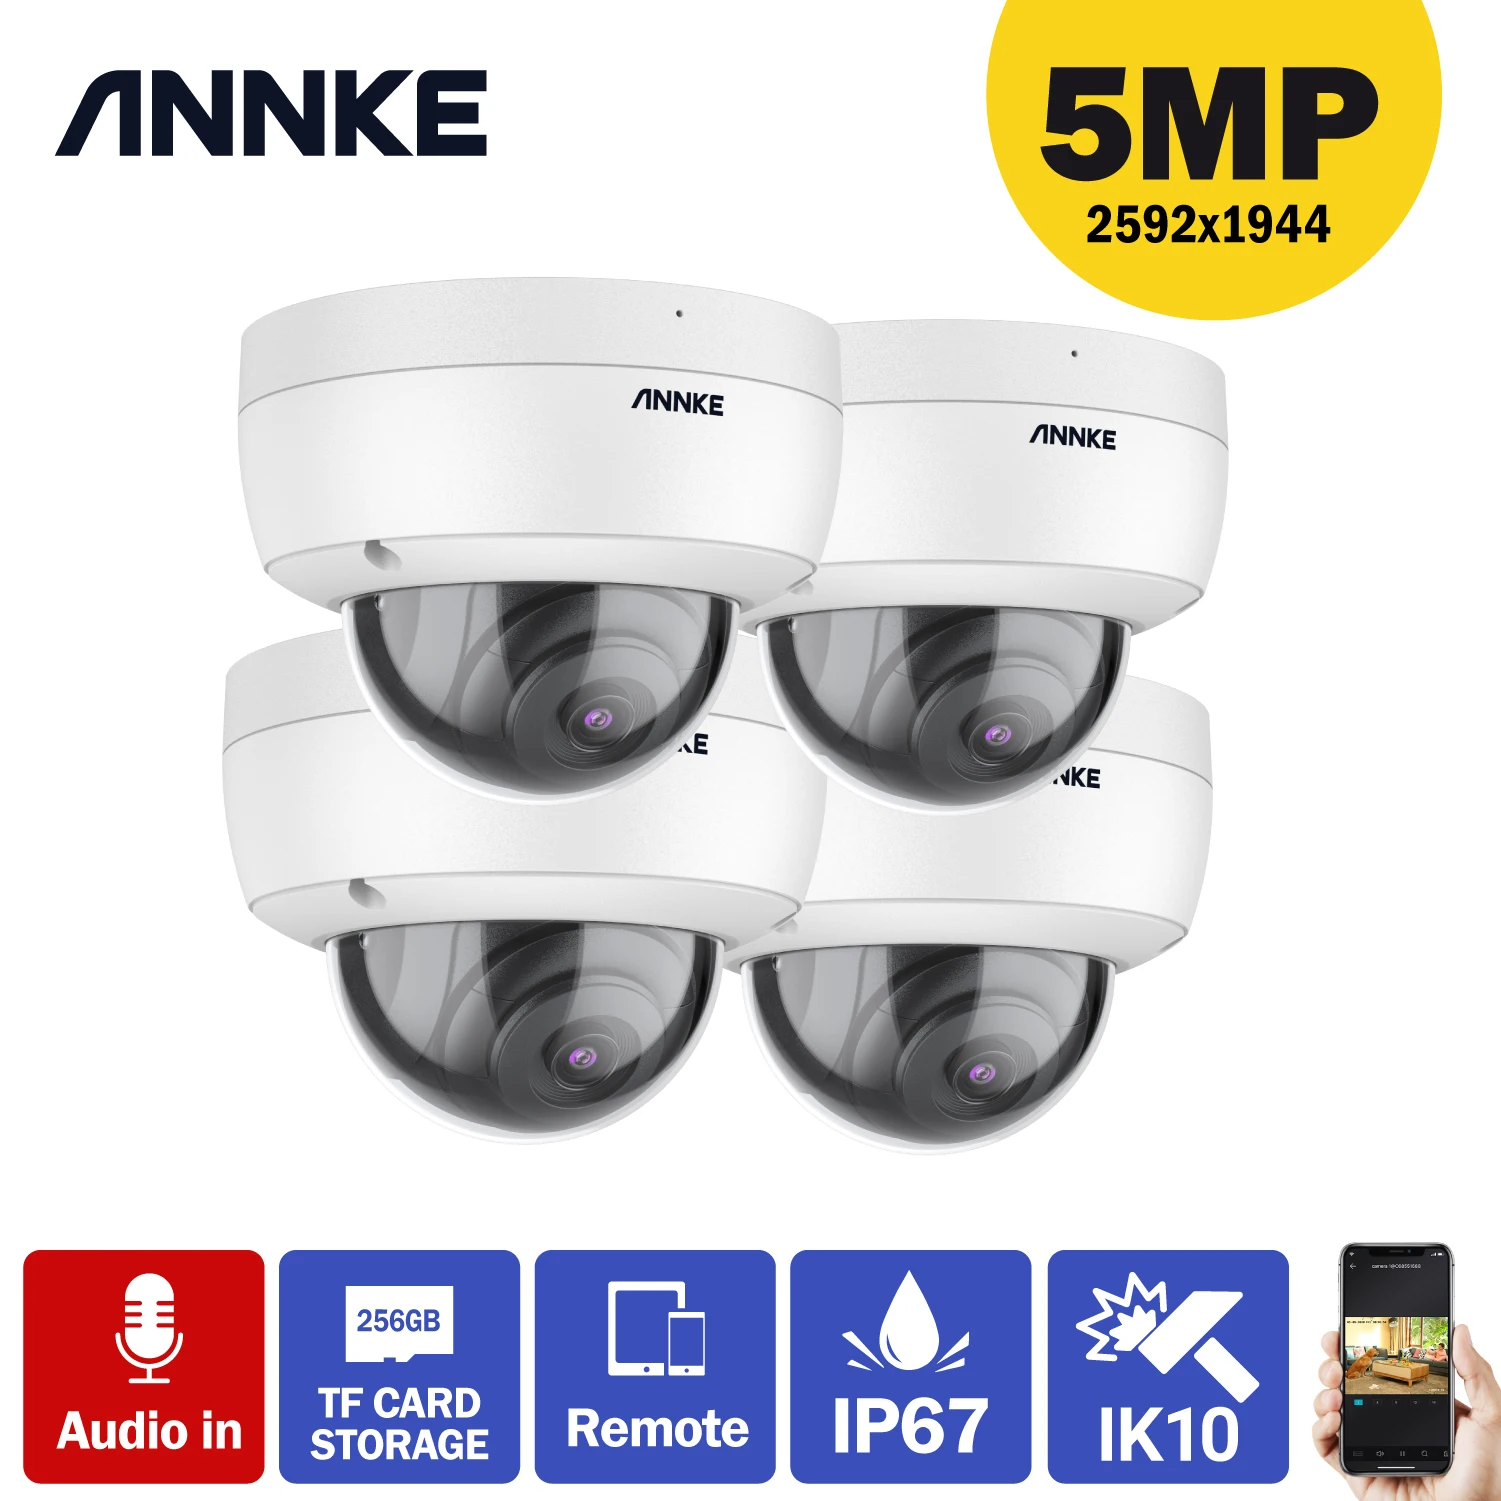 ANNKE 4PCS C500 Dome 5MP Outdoor IK10 Vandal-Proof POE Security Cameras With Audio in POE Surveillance Cameras TF Card Support